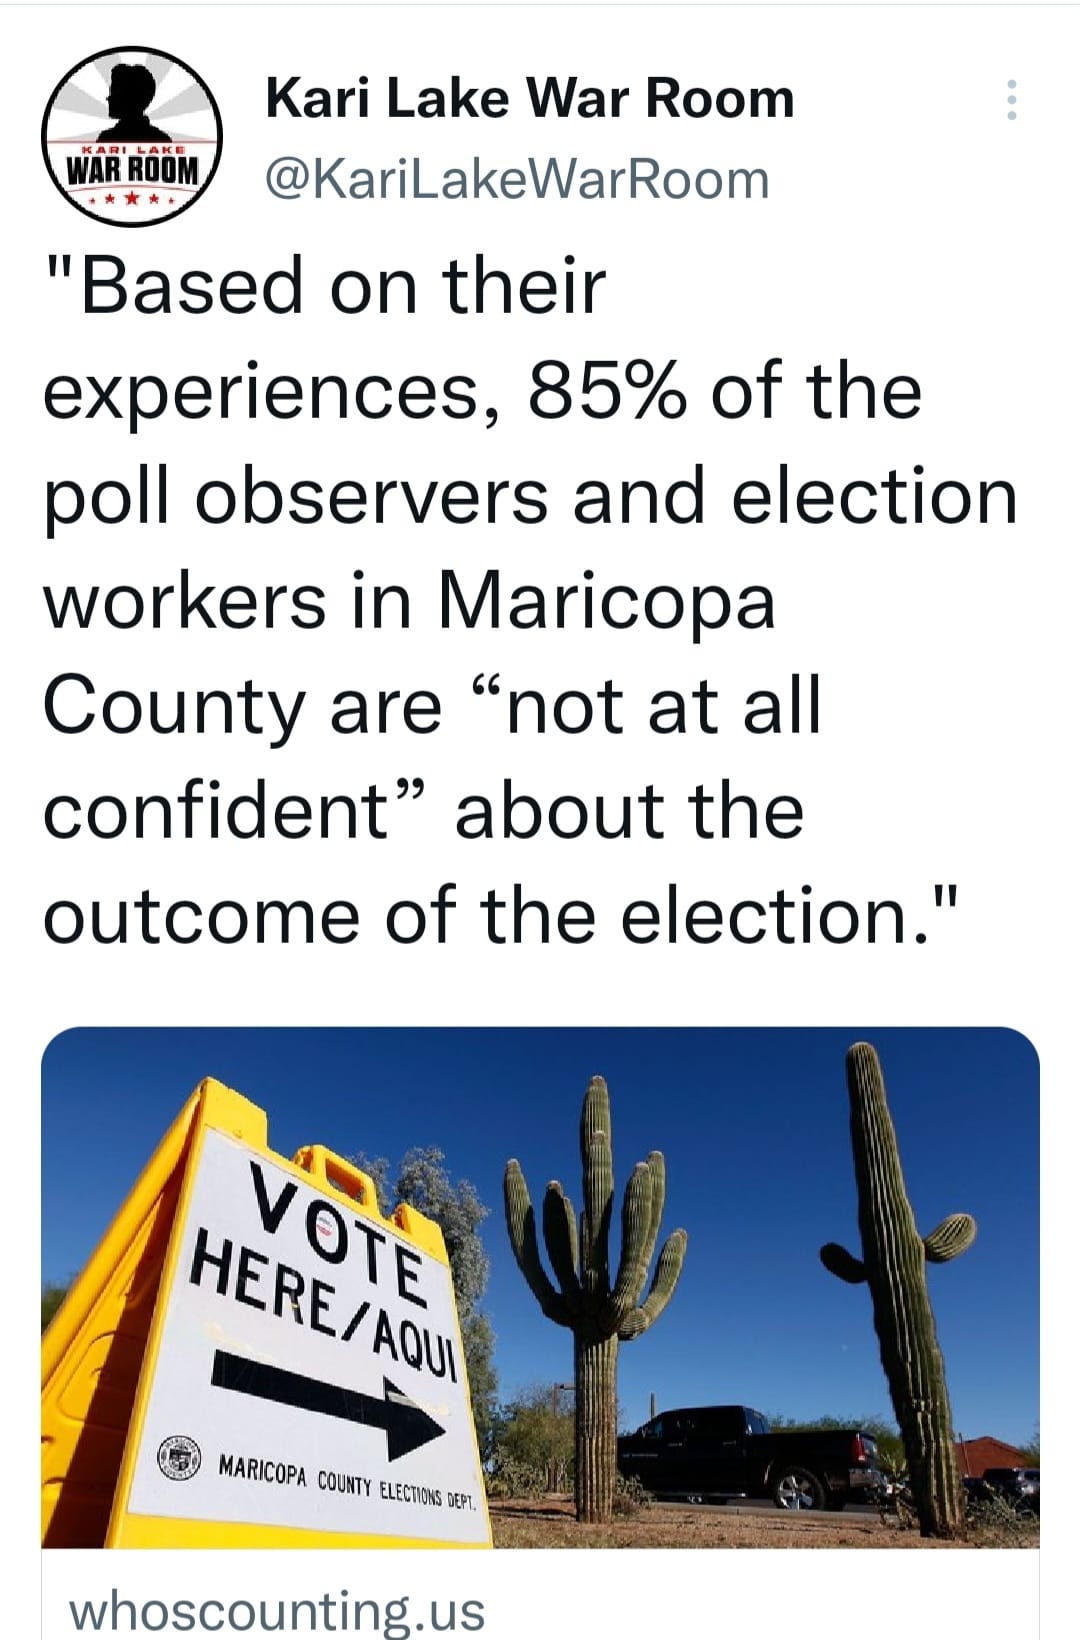 May be an image of text that says 'WARROOM Kari Lake War Room @KariLakeWarRoom "Based on their experiences, 85% of the poll observers and election workers in Maricopa County are "not at all confident" about the outcome of the election." A HERE/AQUI AQUI VOTE MARICOPA COUNTY ELECTIONG DEPL, whoscounting.us'